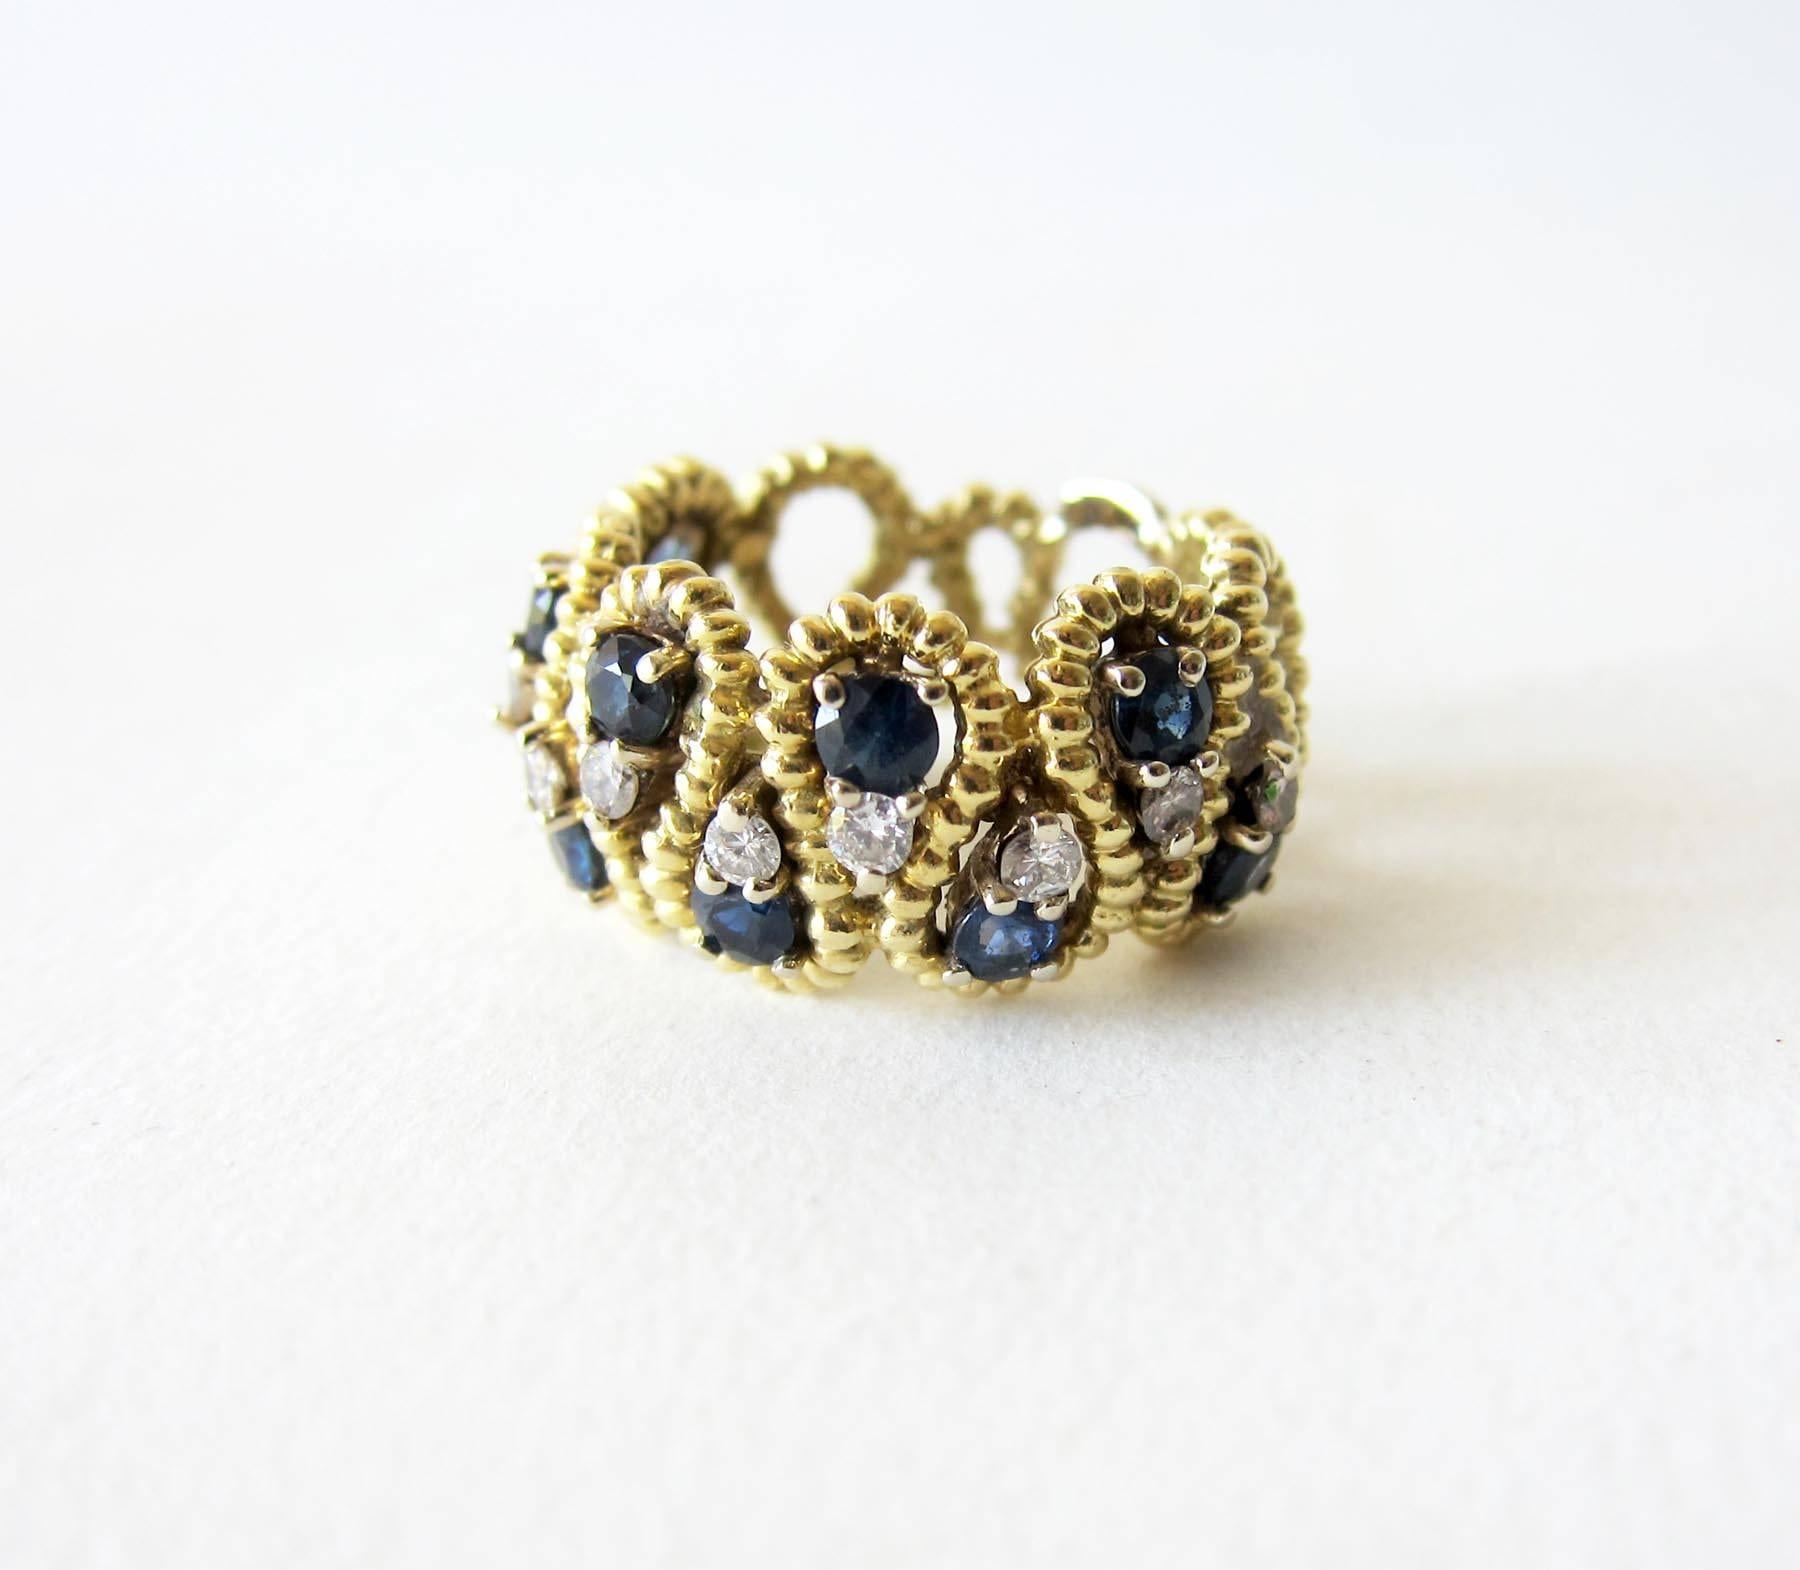 18k gold, sapphire and diamond lattice ring circa 1950's.  Ring is a finger size 7.5 to 8 due to its unusual shape.  Unsigned.  11.5 grams.